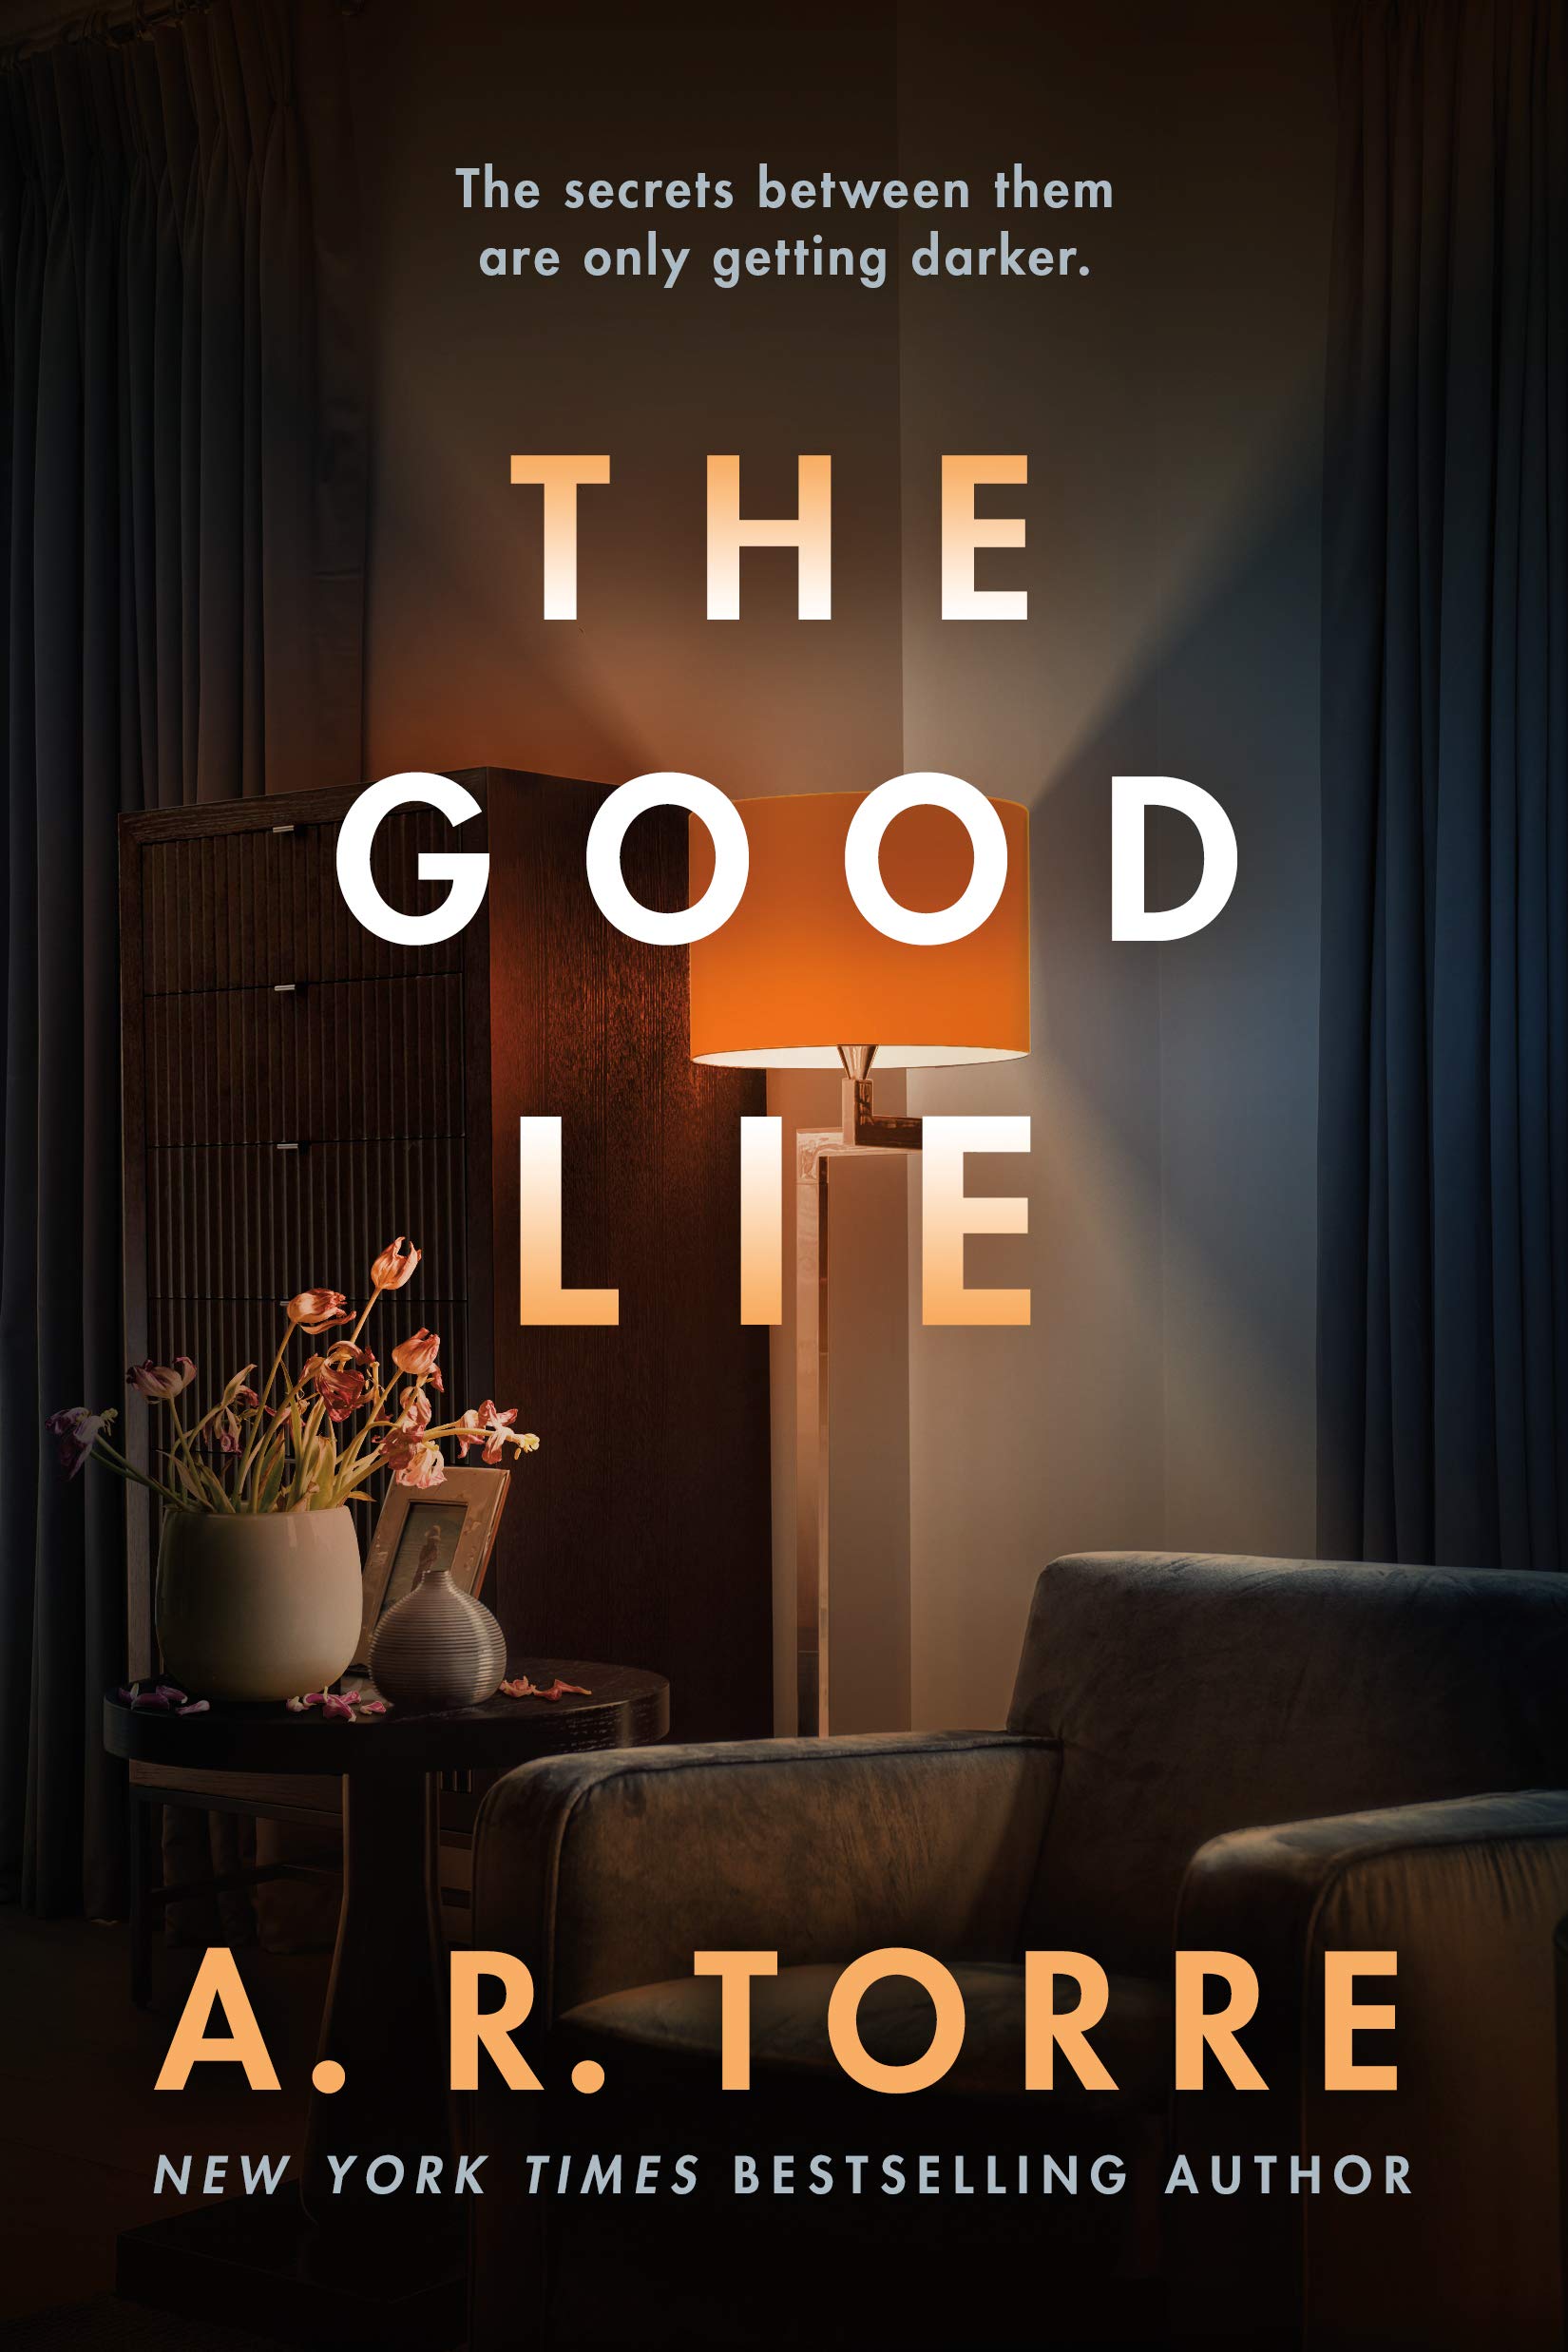 Dark Thrill reviews: The Good Lie by A.R. Torre